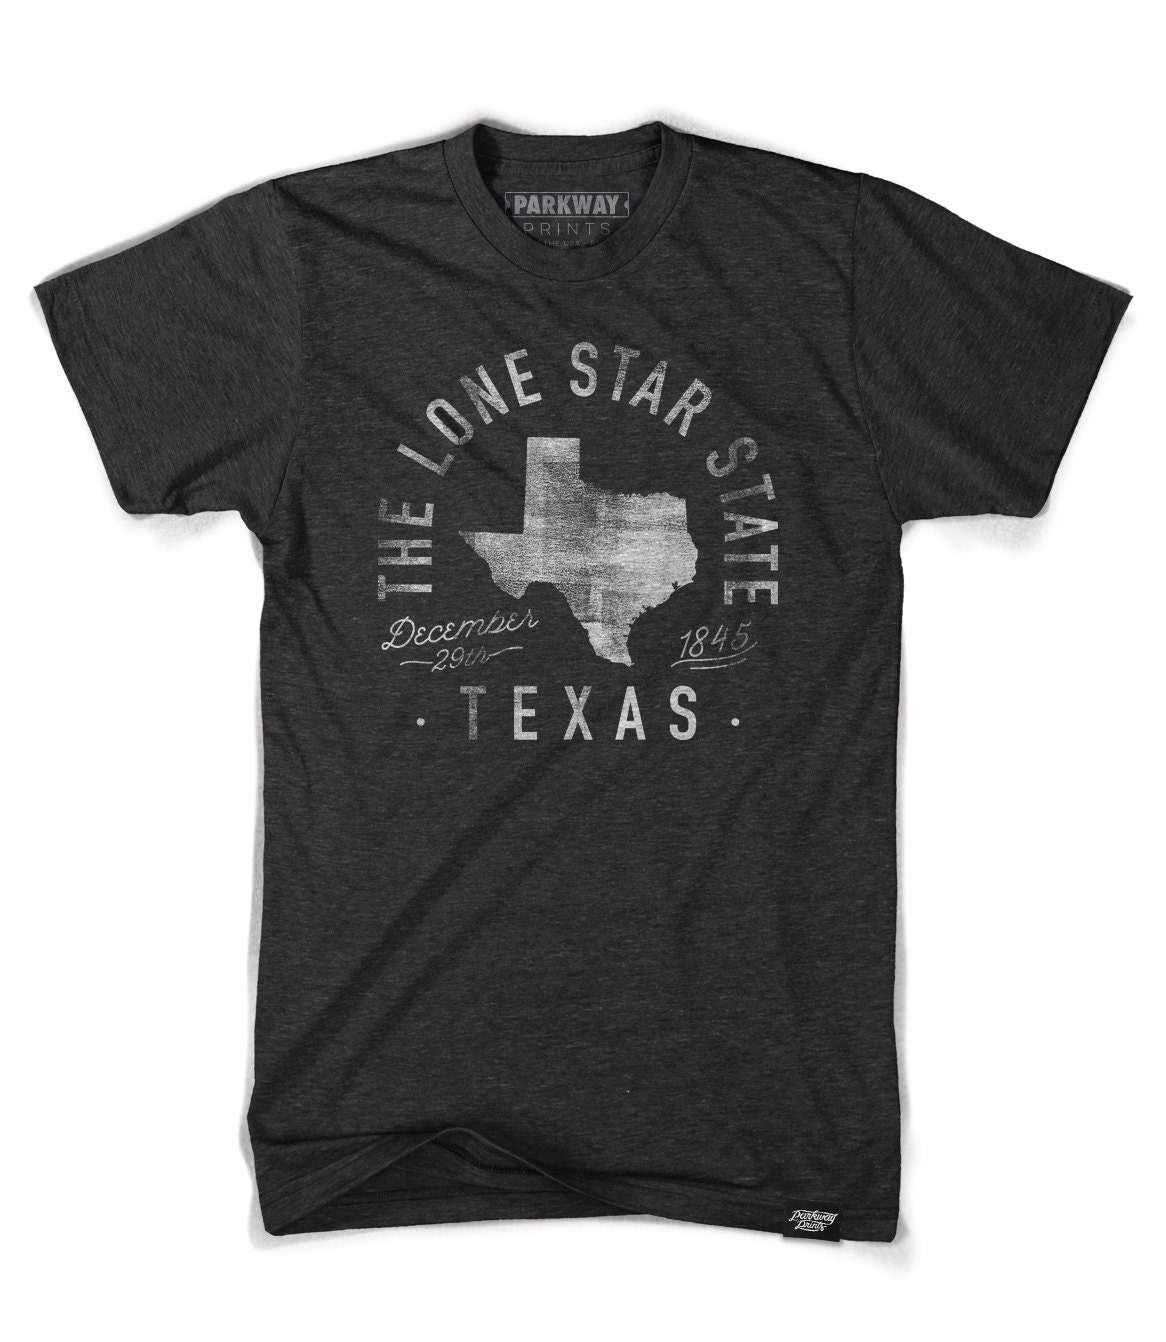 State of Texas Motto Shirt by ParkwayPrints on Etsy